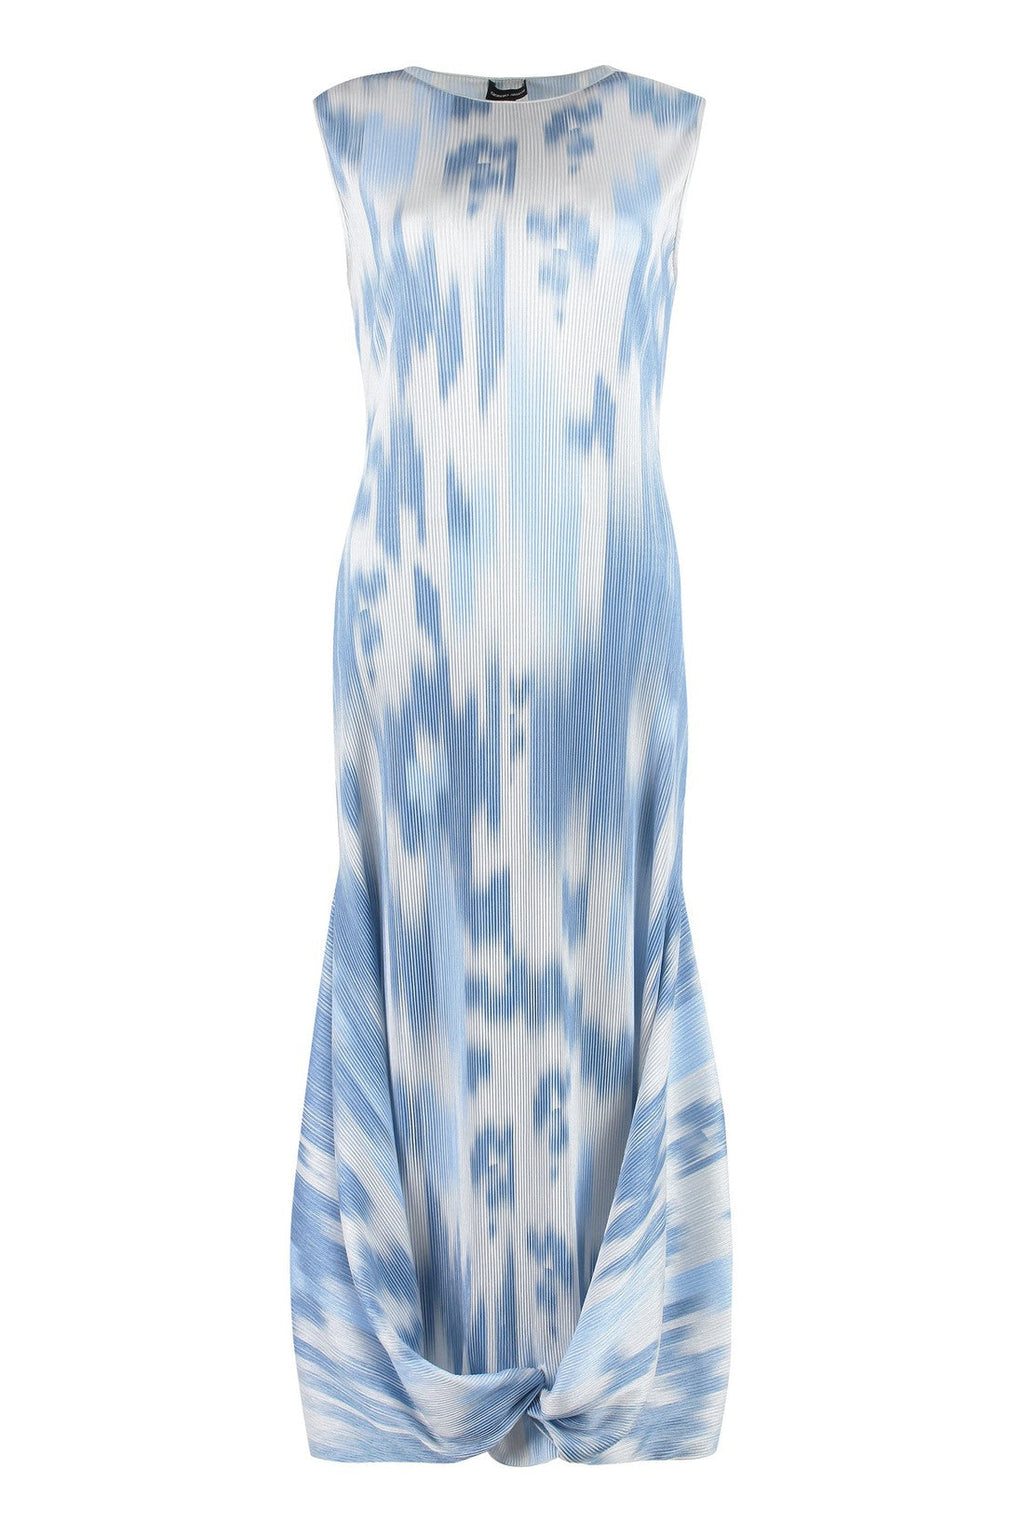 Giorgio Armani-OUTLET-SALE-Printed jersey long dress-ARCHIVIST